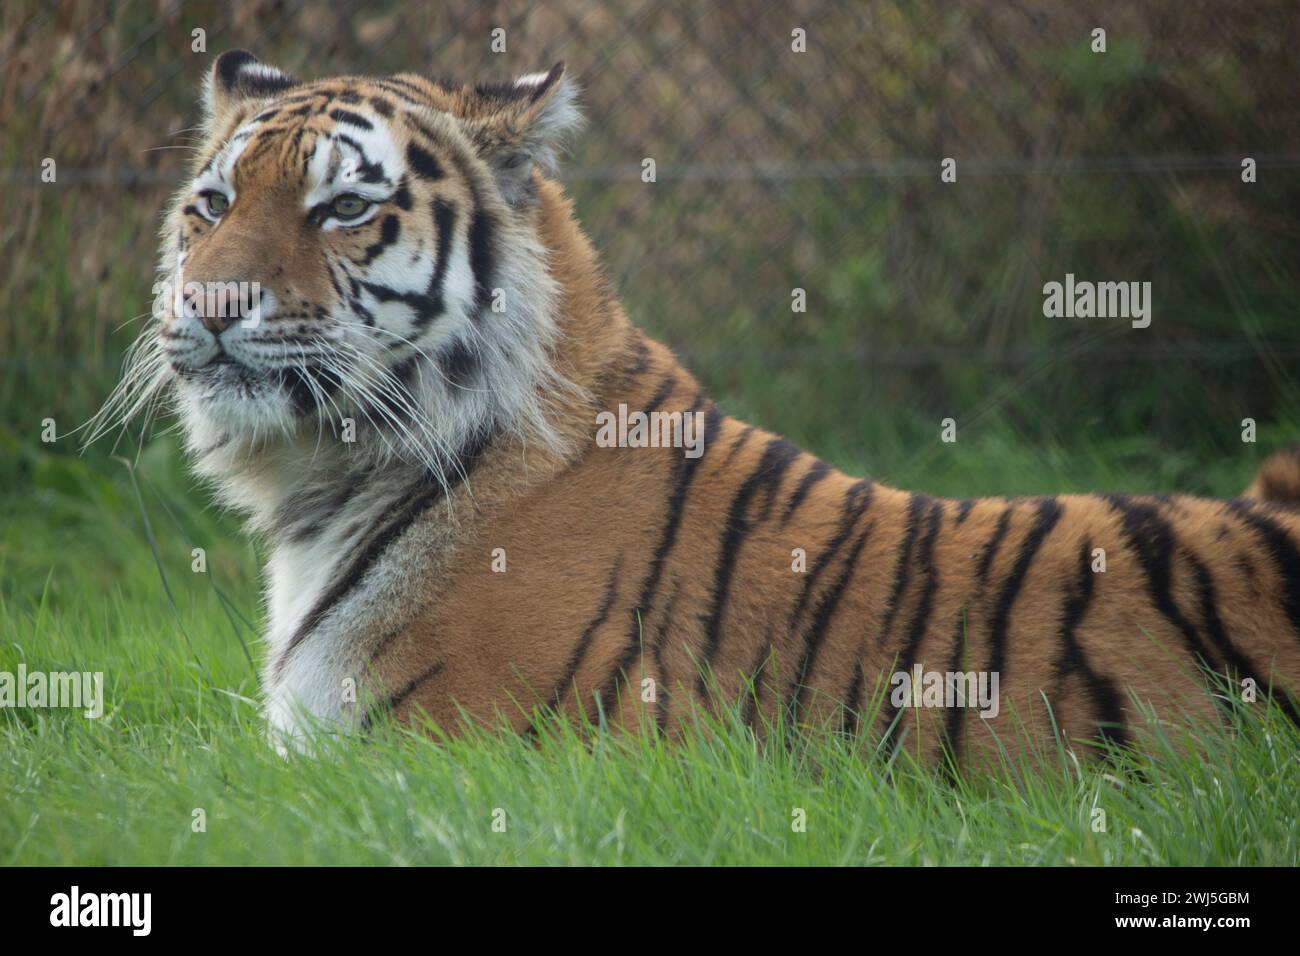 A portrait of a tiger in a zoo enclosure Stock Photo